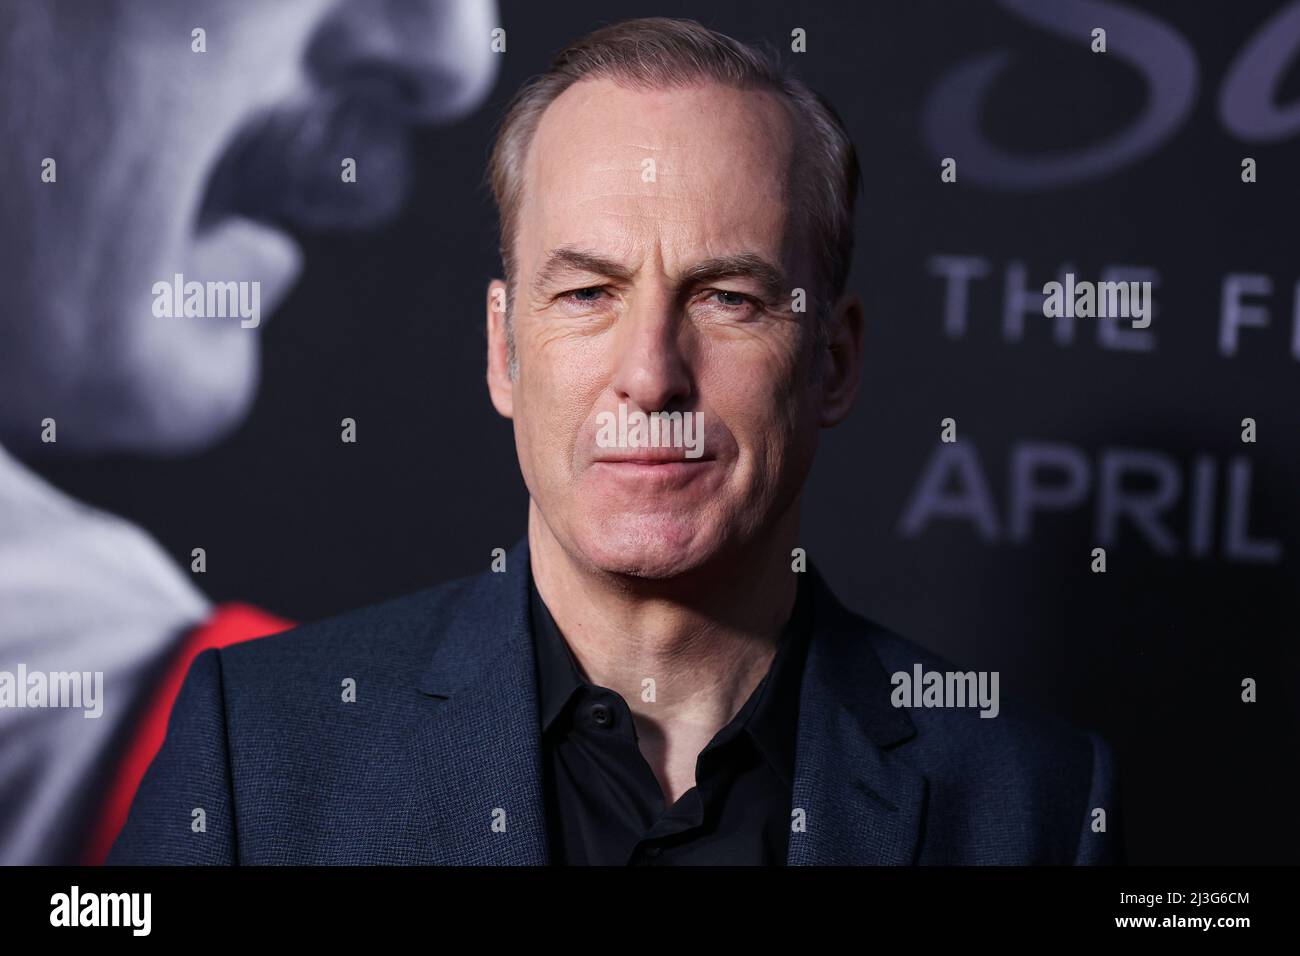 HOLLYWOOD, LOS ANGELES, CALIFORNIA, USA - APRIL 07: Bob Odenkirk arrives at the Los Angeles Premiere Of AMC's 'Better Call Saul' Season 6 held at the Hollywood American Legion Theatre Post 43 on April 7, 2022 in Hollywood, Los Angeles, California, United States. (Photo by Xavier Collin/Image Press Agency/Sipa USA) Stock Photo